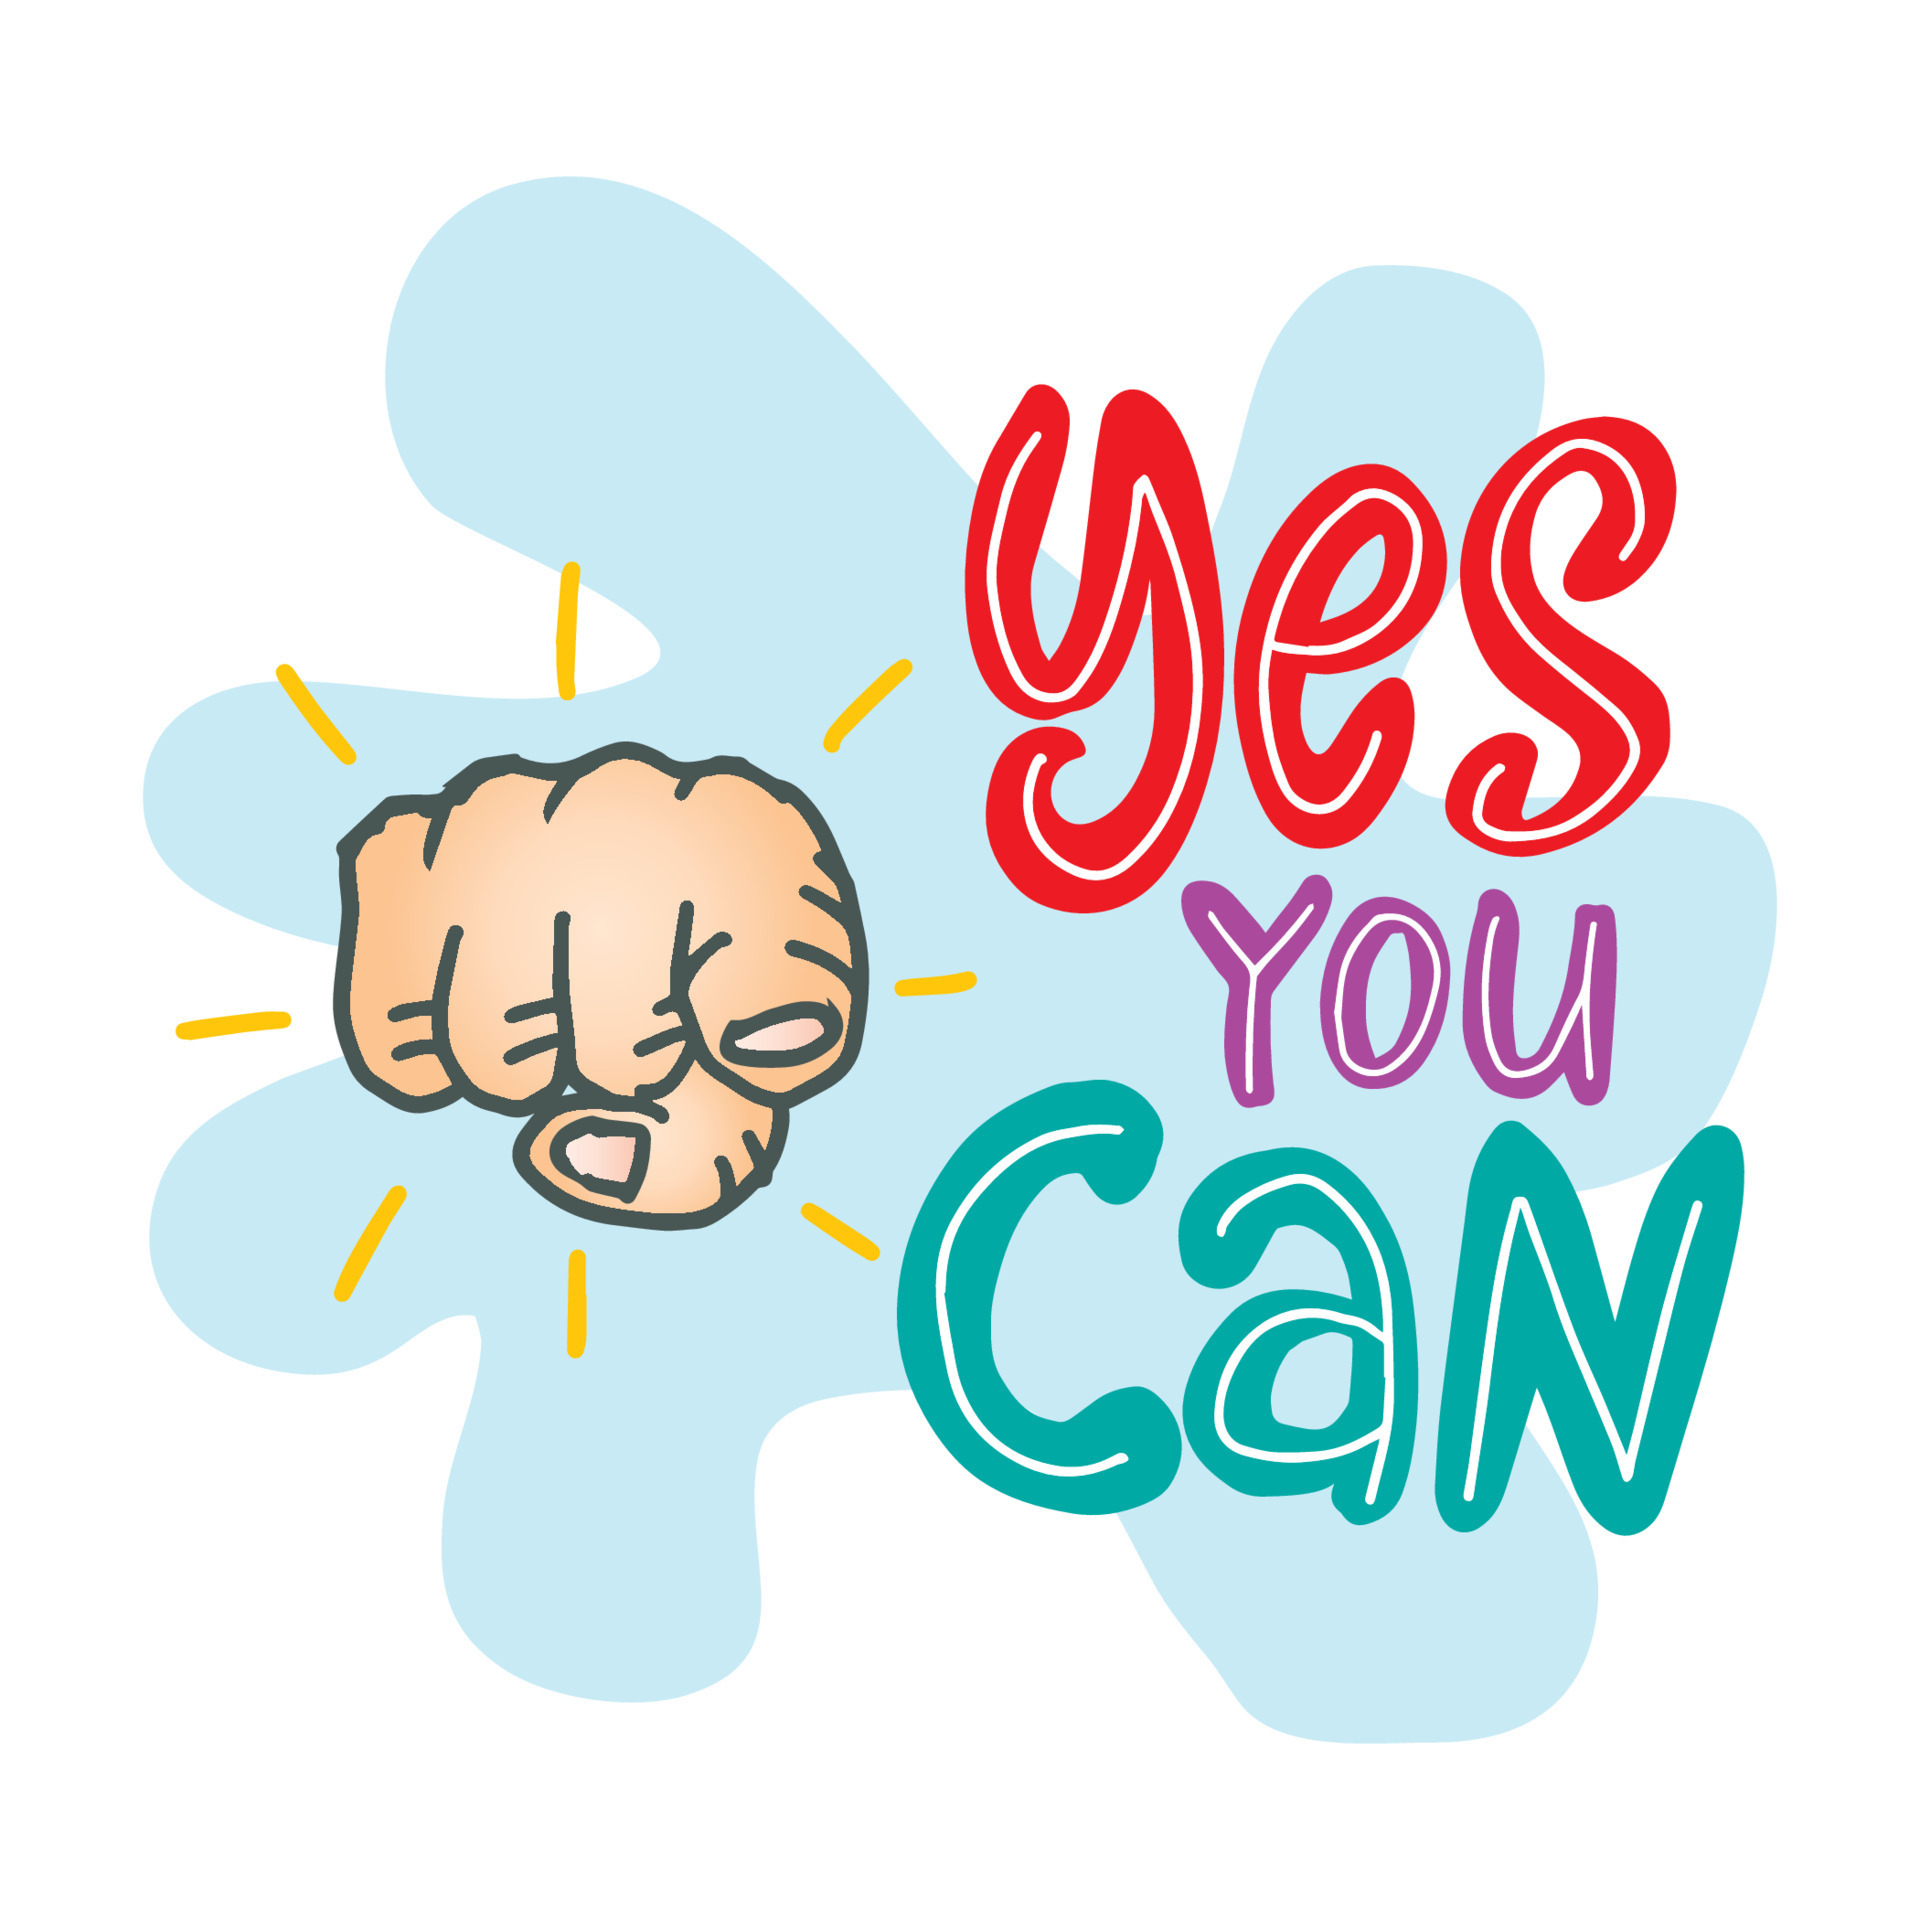 Illustration yes you can